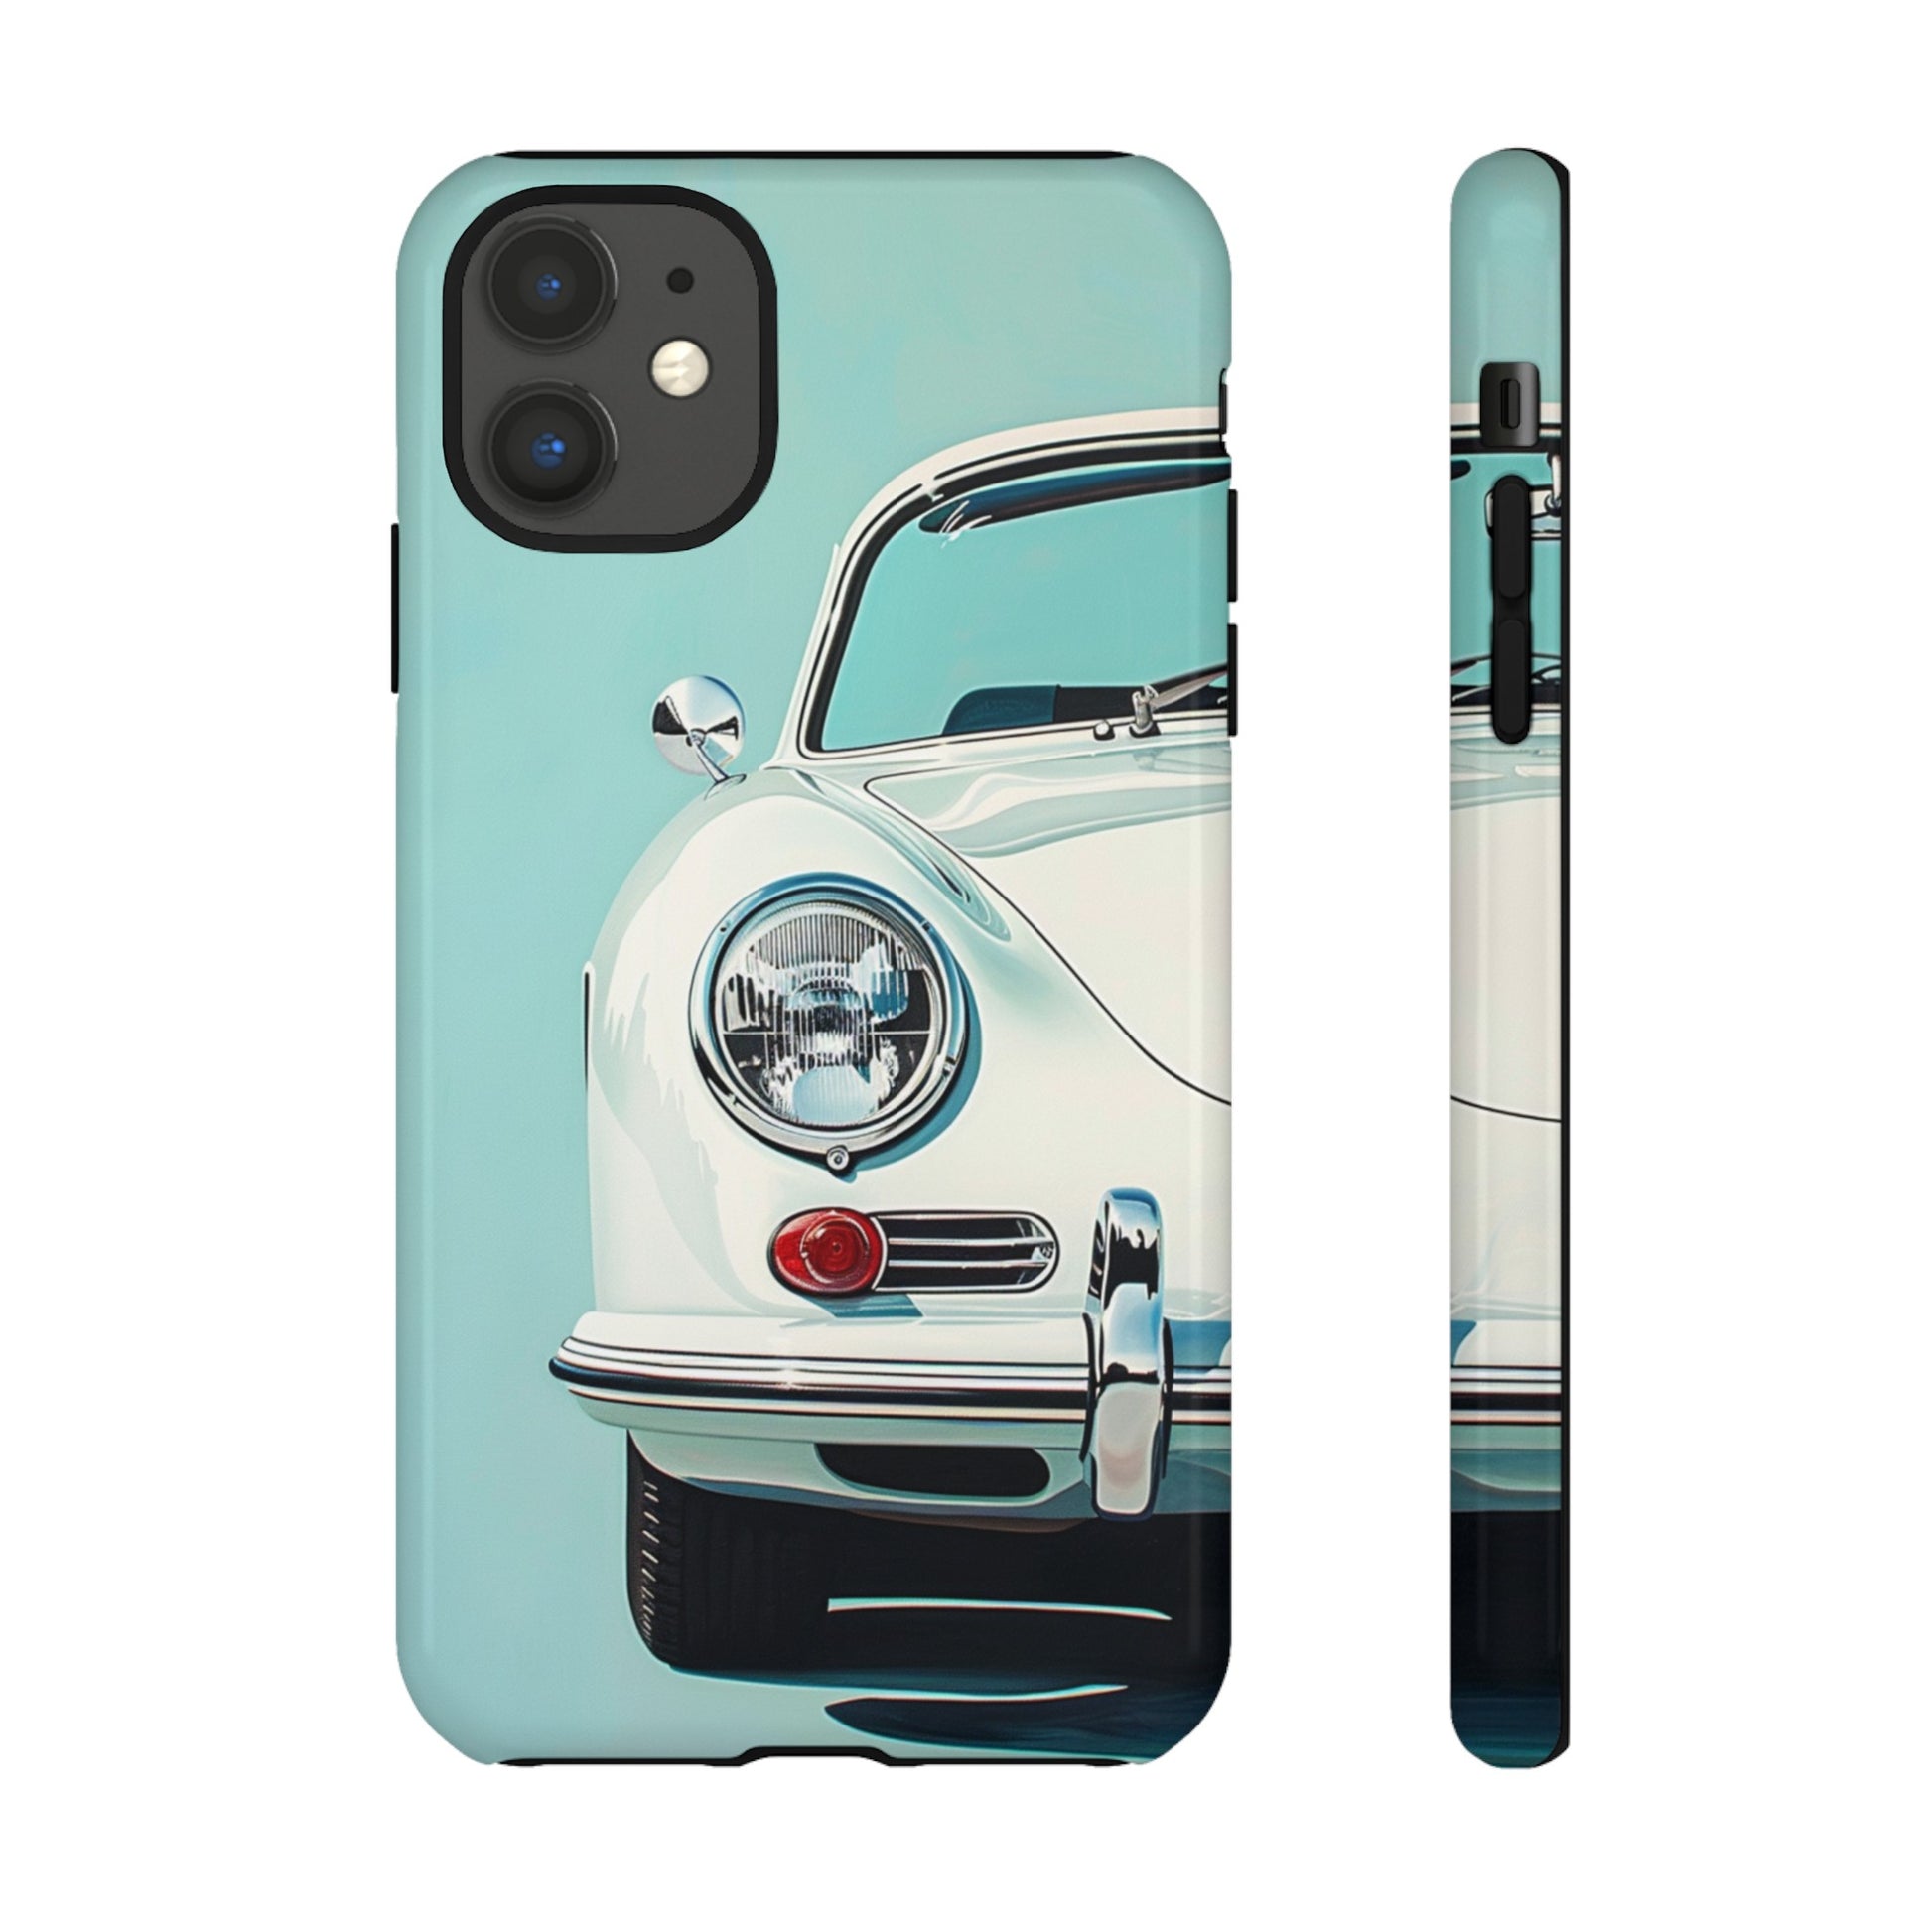 Classic car design cover for iPhone 12